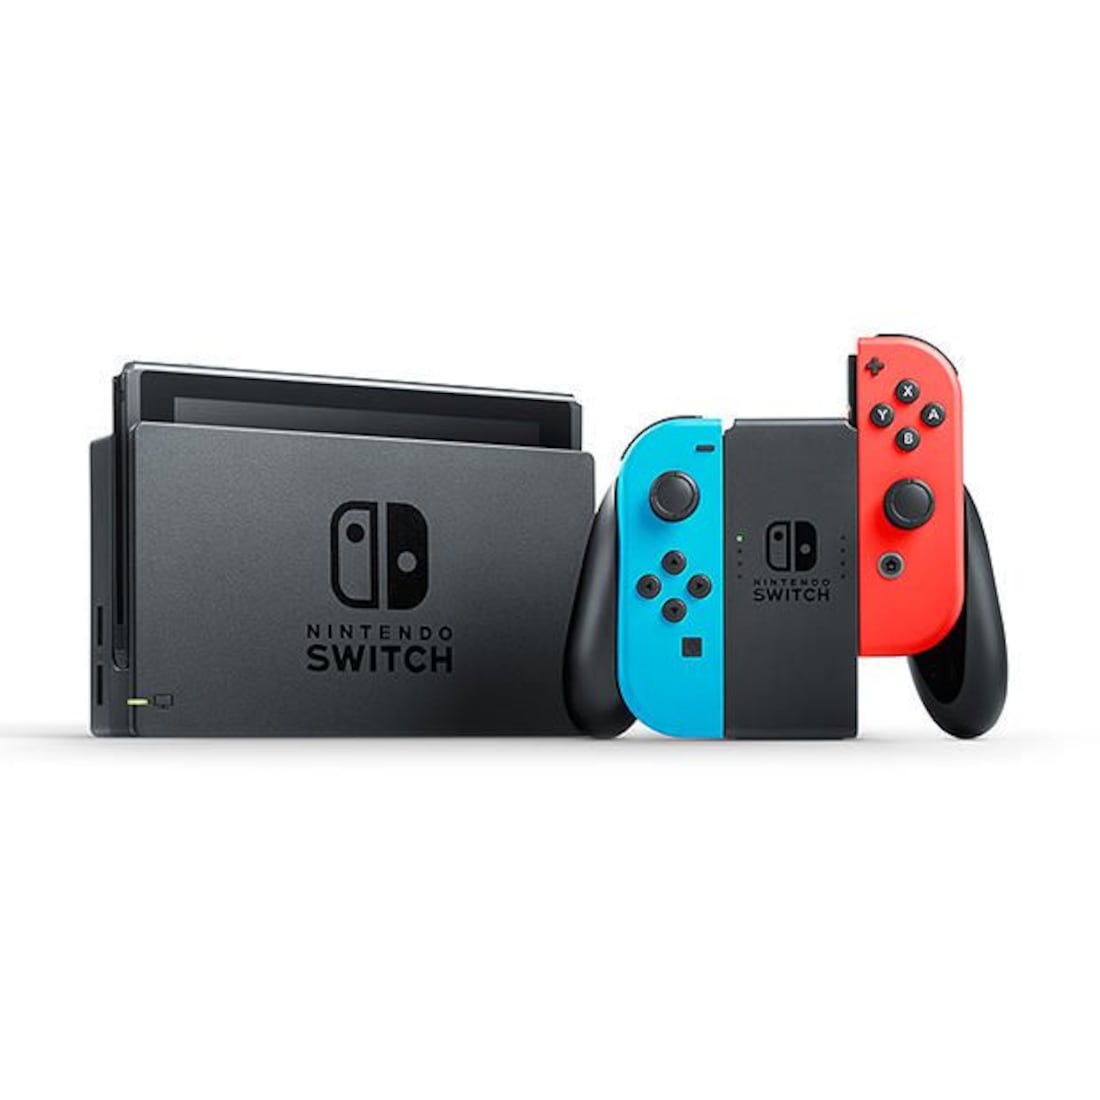 New Low-Cost Nintendo Switch Model Expected In June